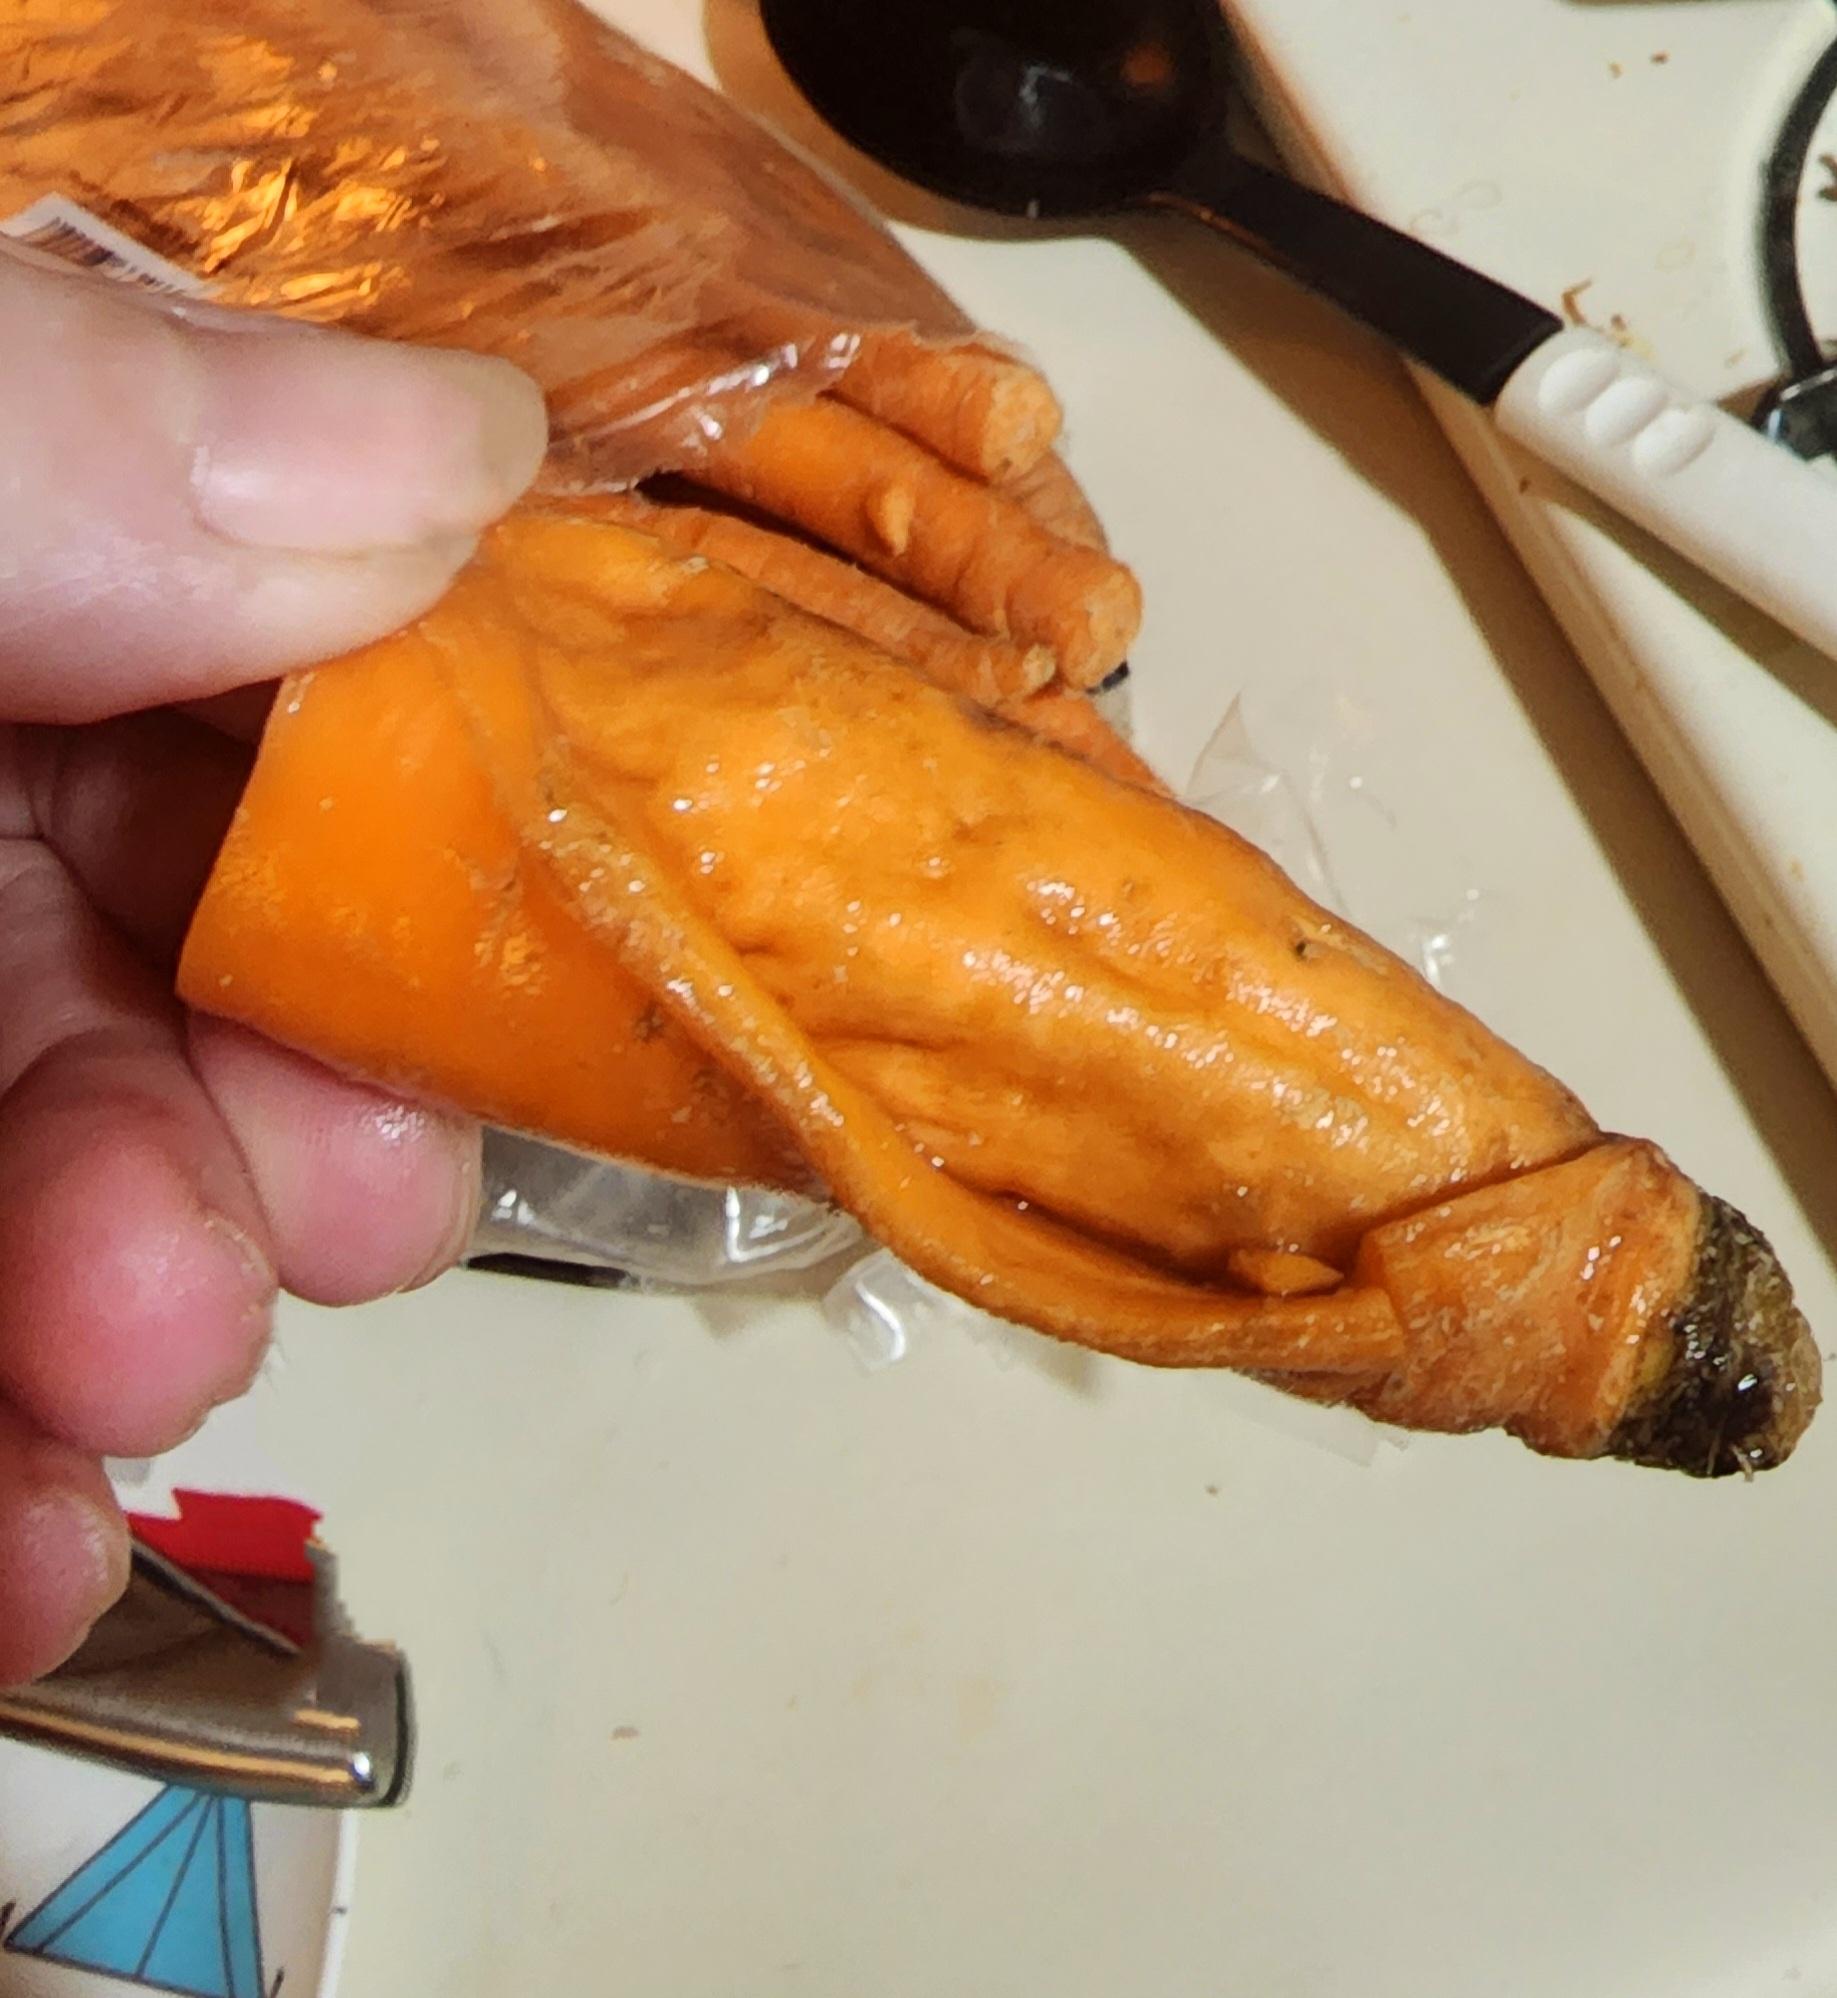 I did no longer know carrots come uncircumcised now….?